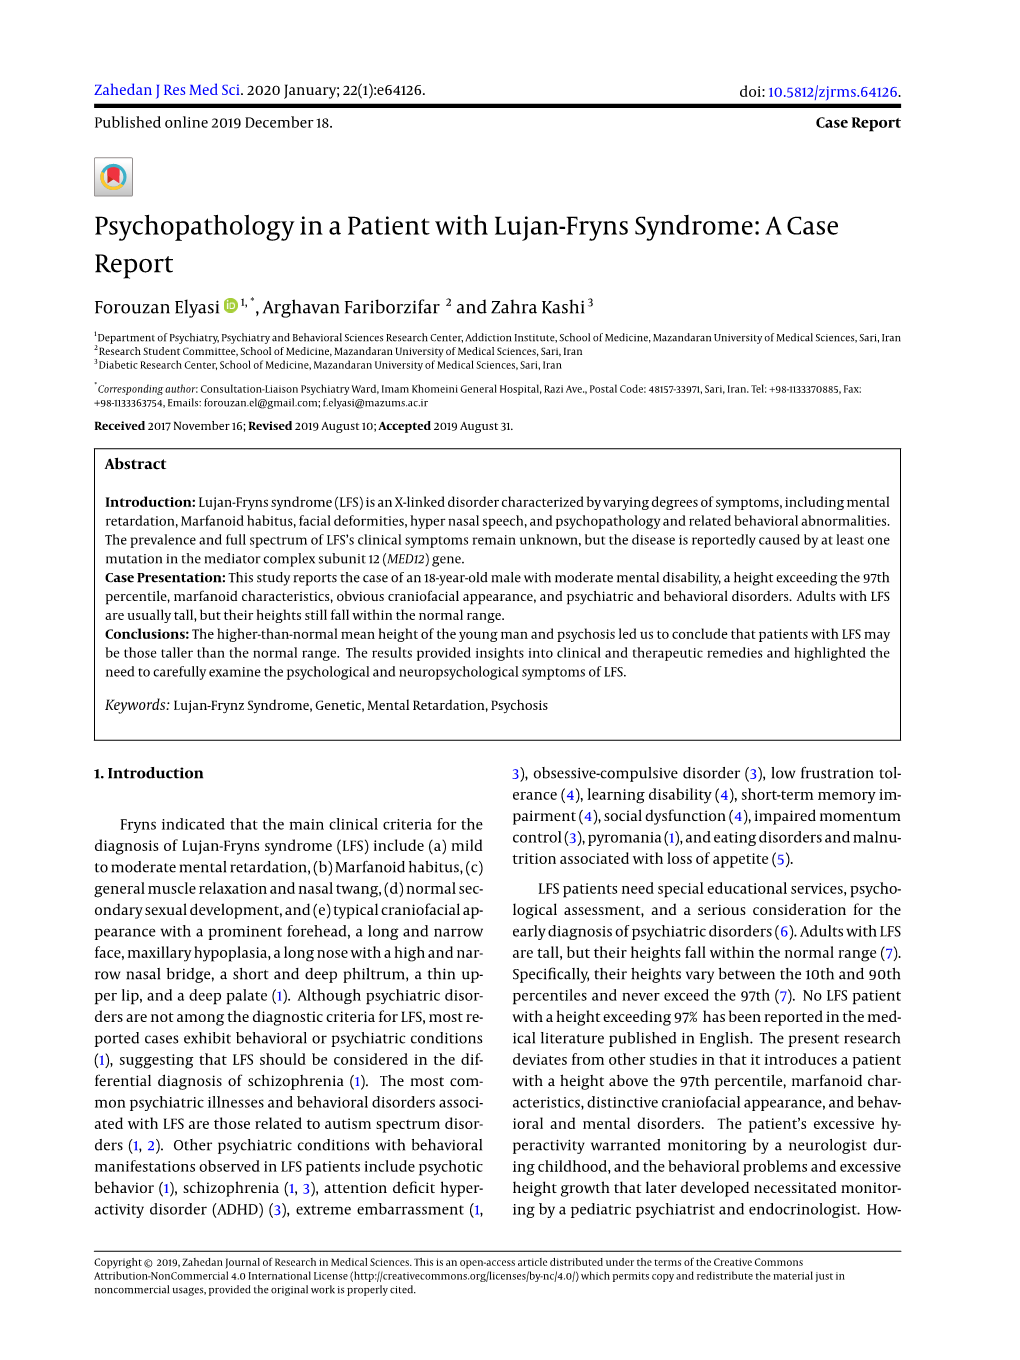 Psychopathology in a Patient with Lujan-Fryns Syndrome: a Case Report